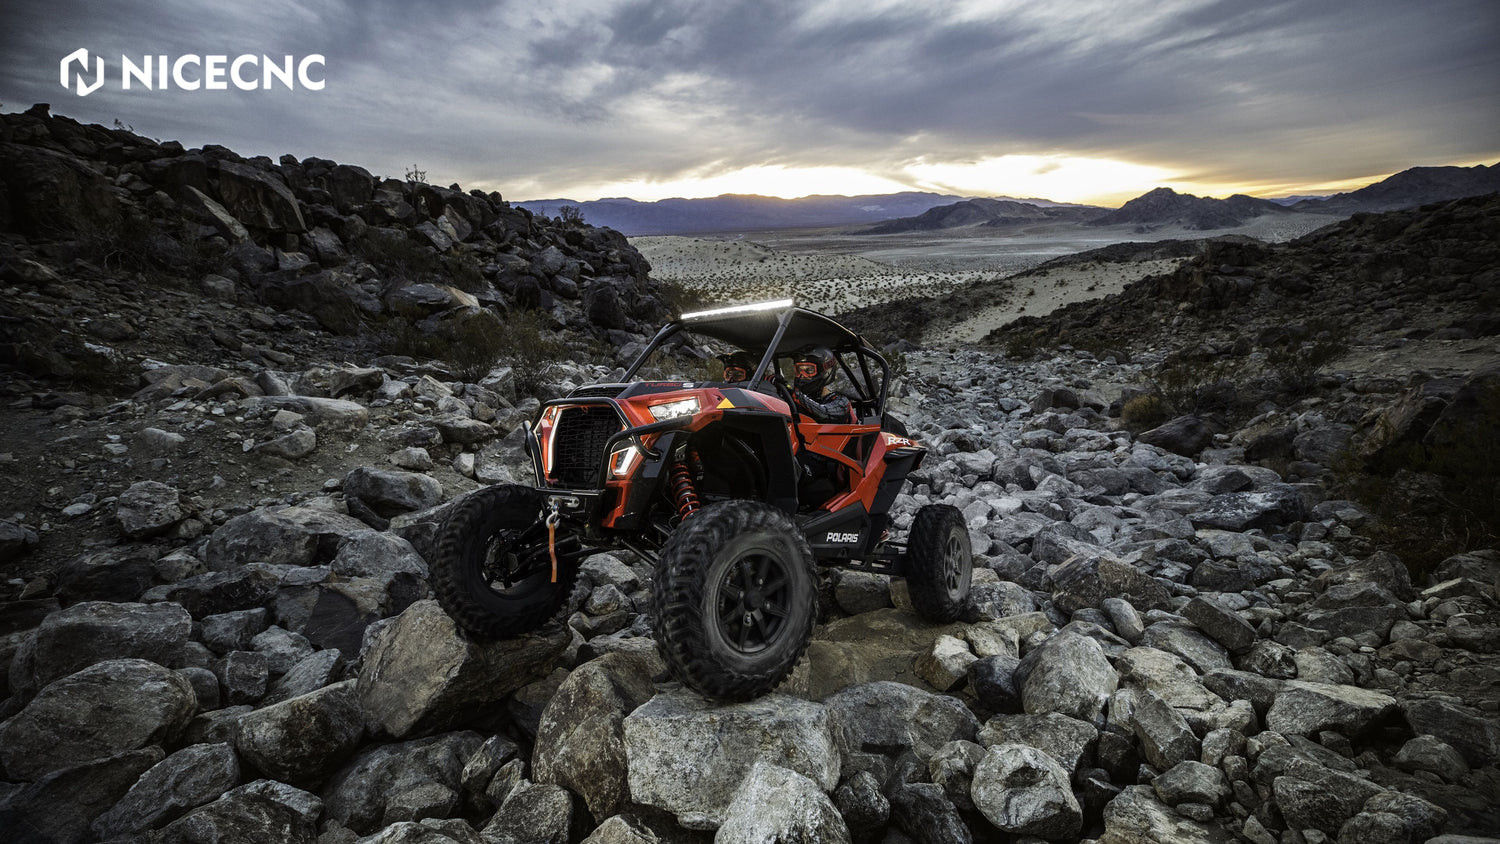 The Best Storage Bags For Your UTV 2022